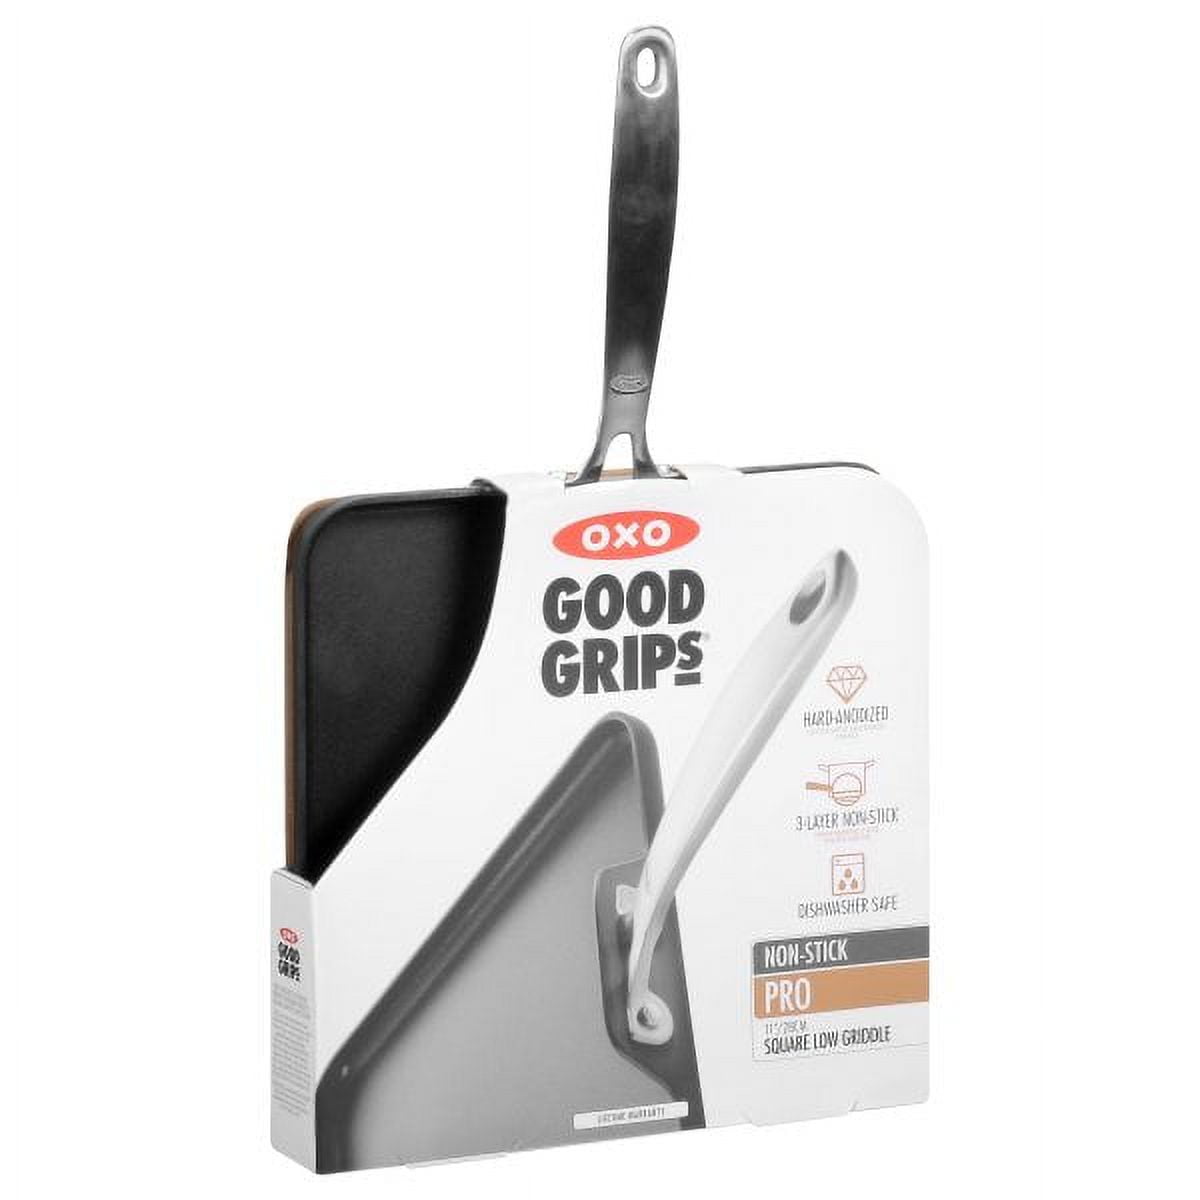 OXO Good Grips Tri-Ply Pro 11-Inch Stainless Steel Square Grill Pan